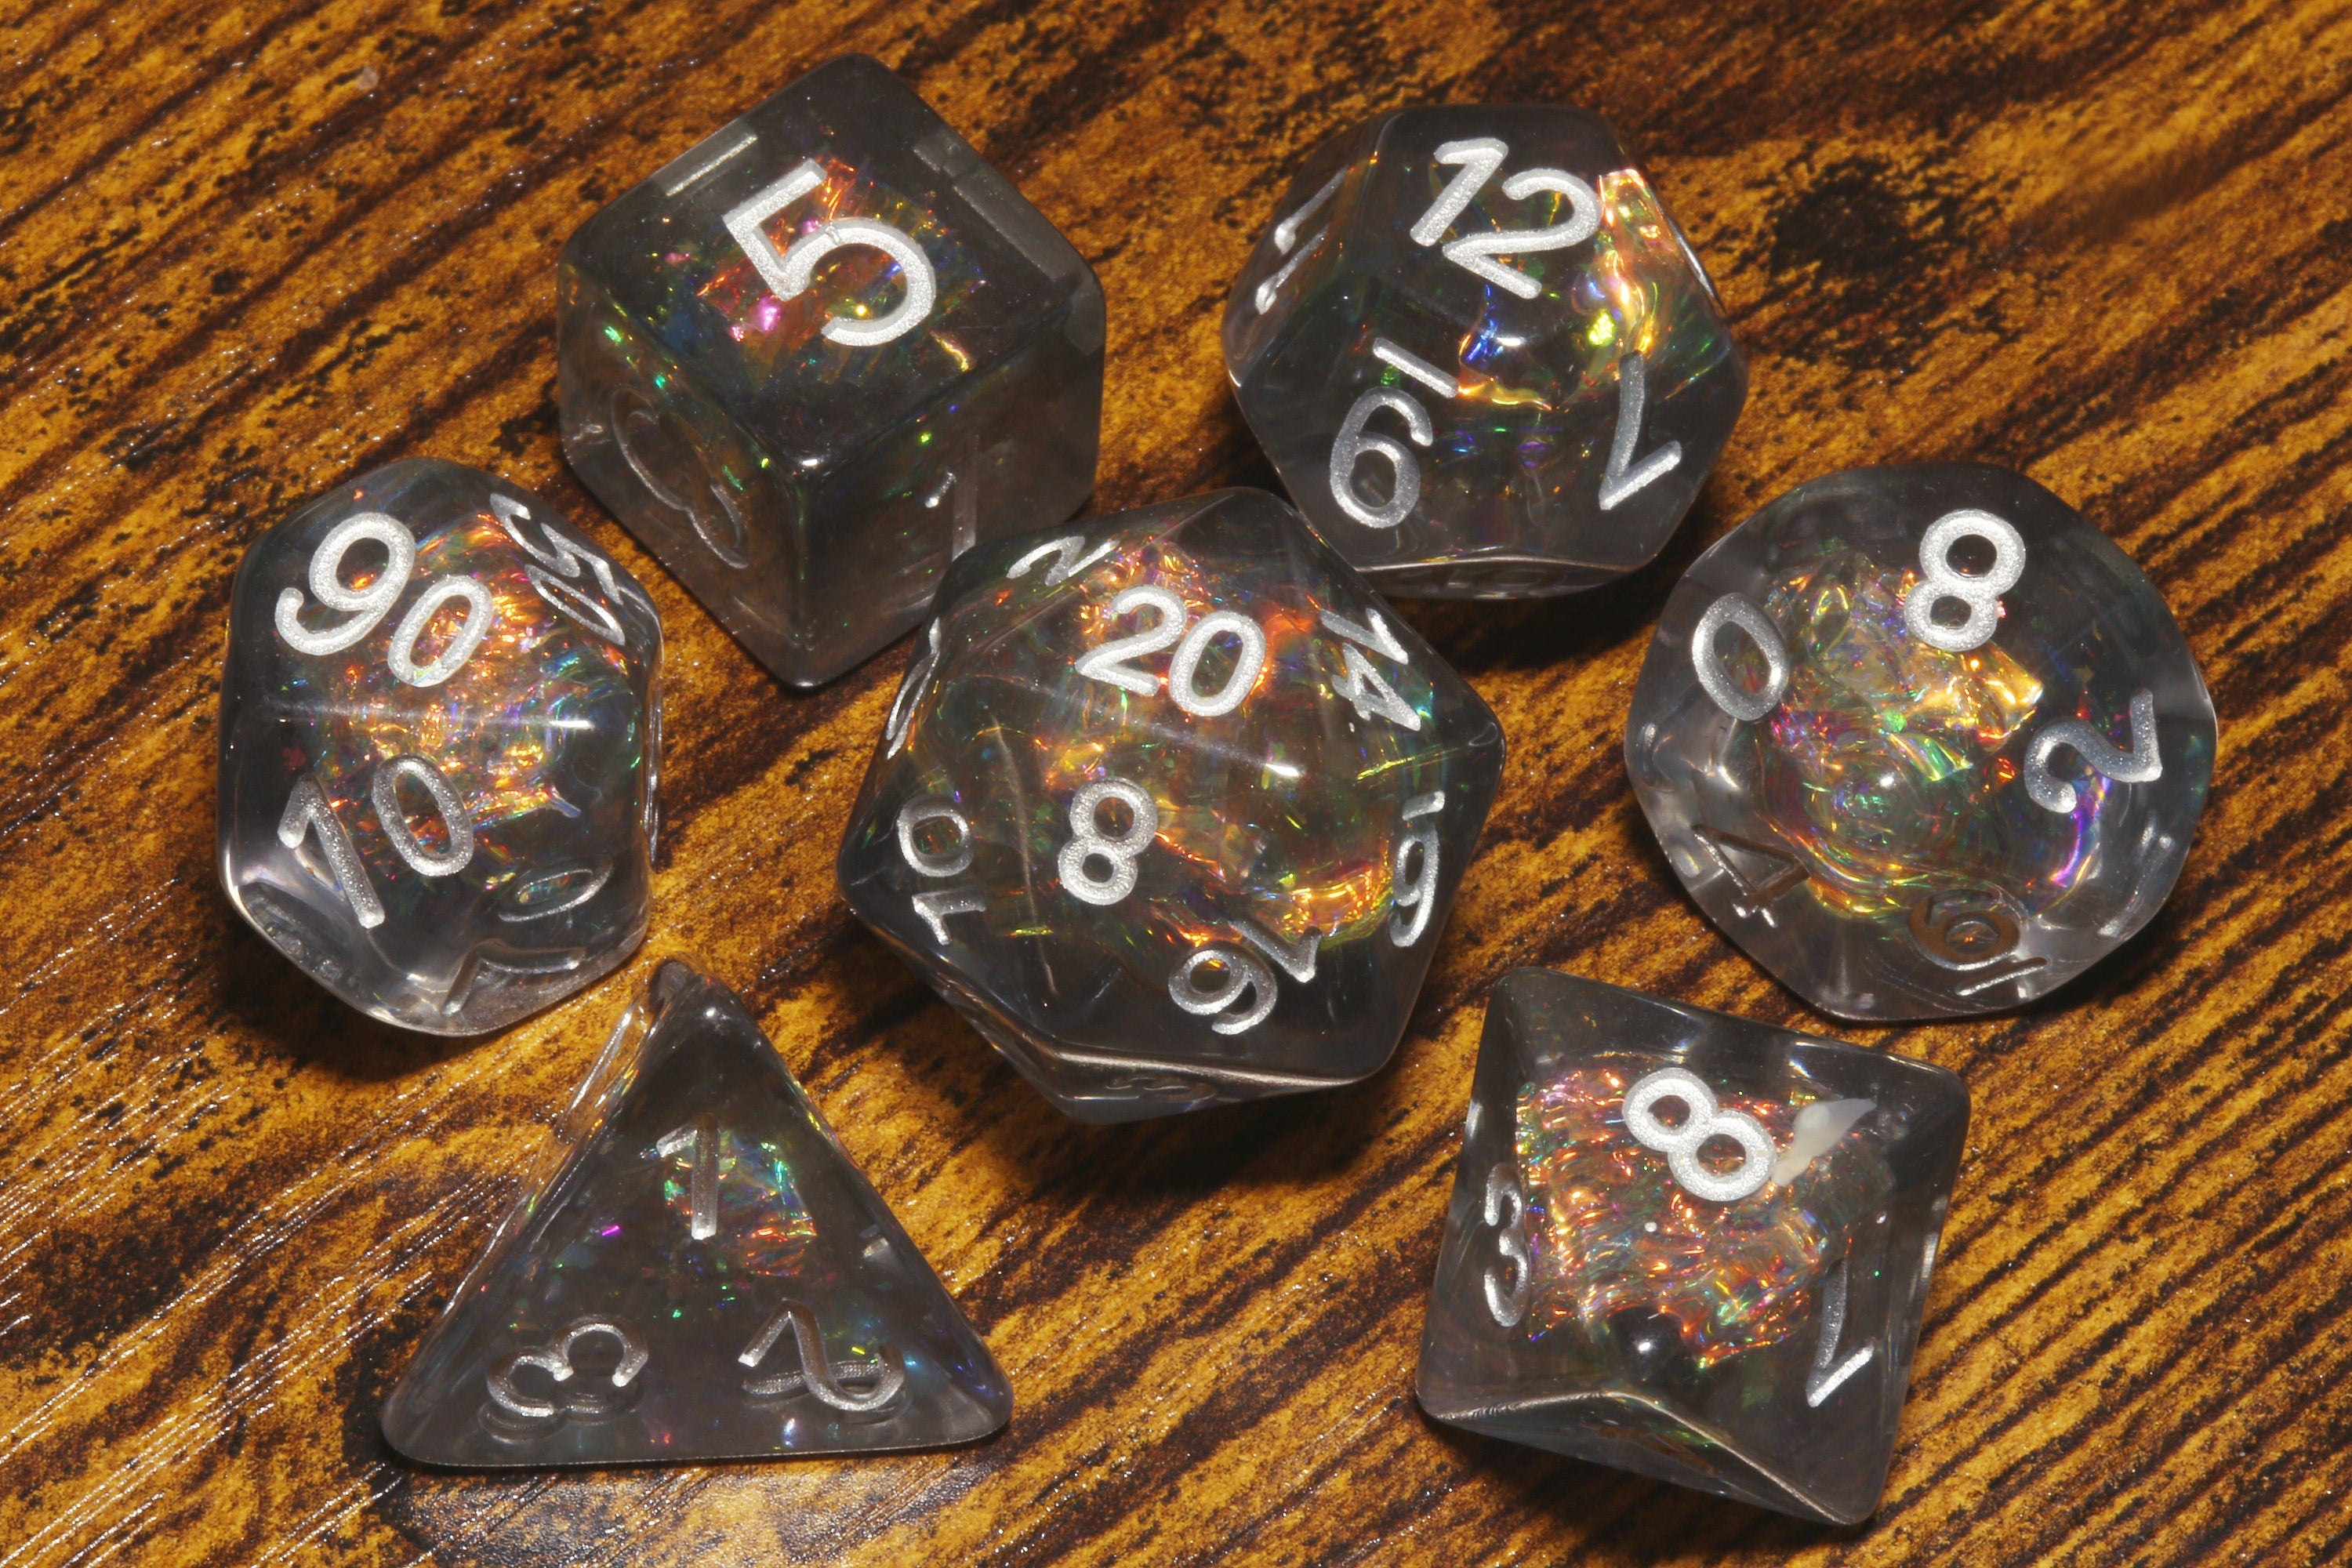 Smokey Grey dice set with Holographic inclusions DND Dice, Translucent with holo glitter , Role Playing games Dice storage, D&D Dice - The Wizard's Vault